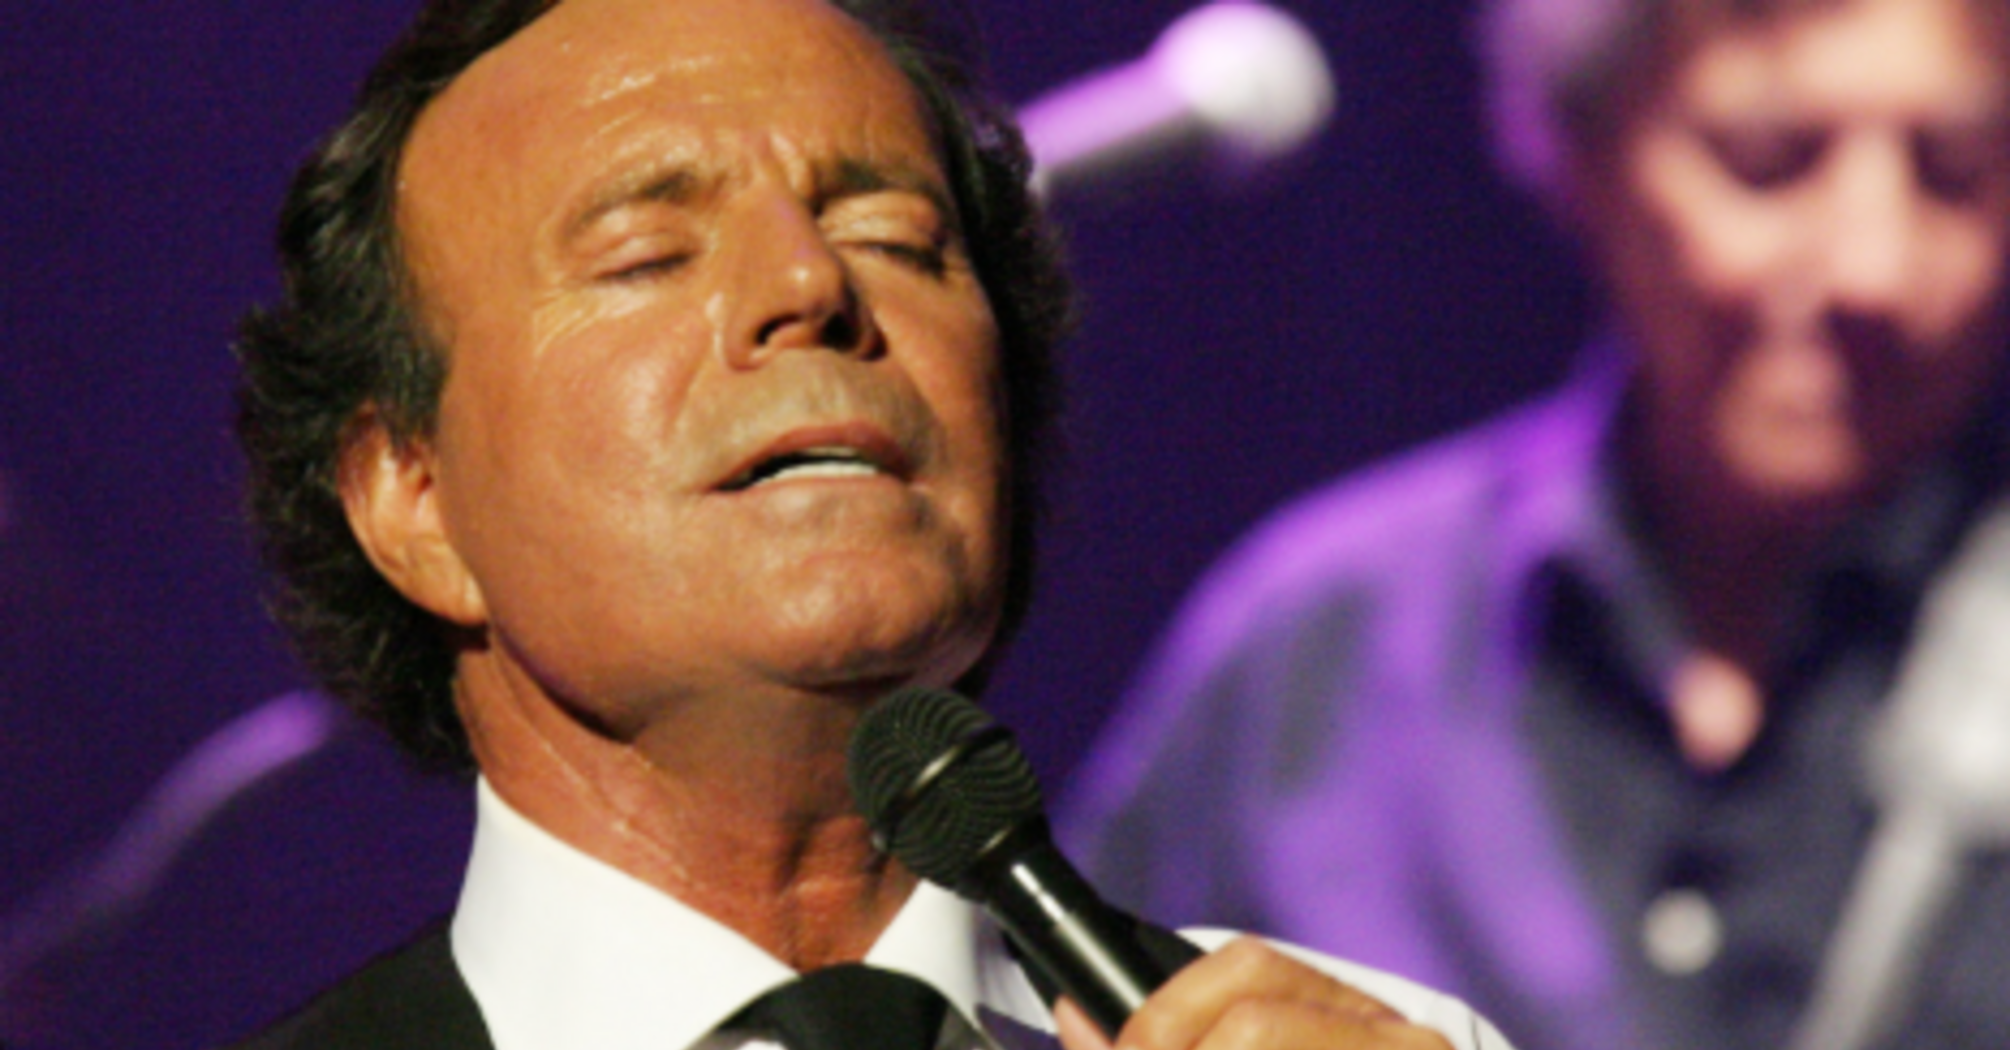 Julio Iglesias was detained at the Dominican airport